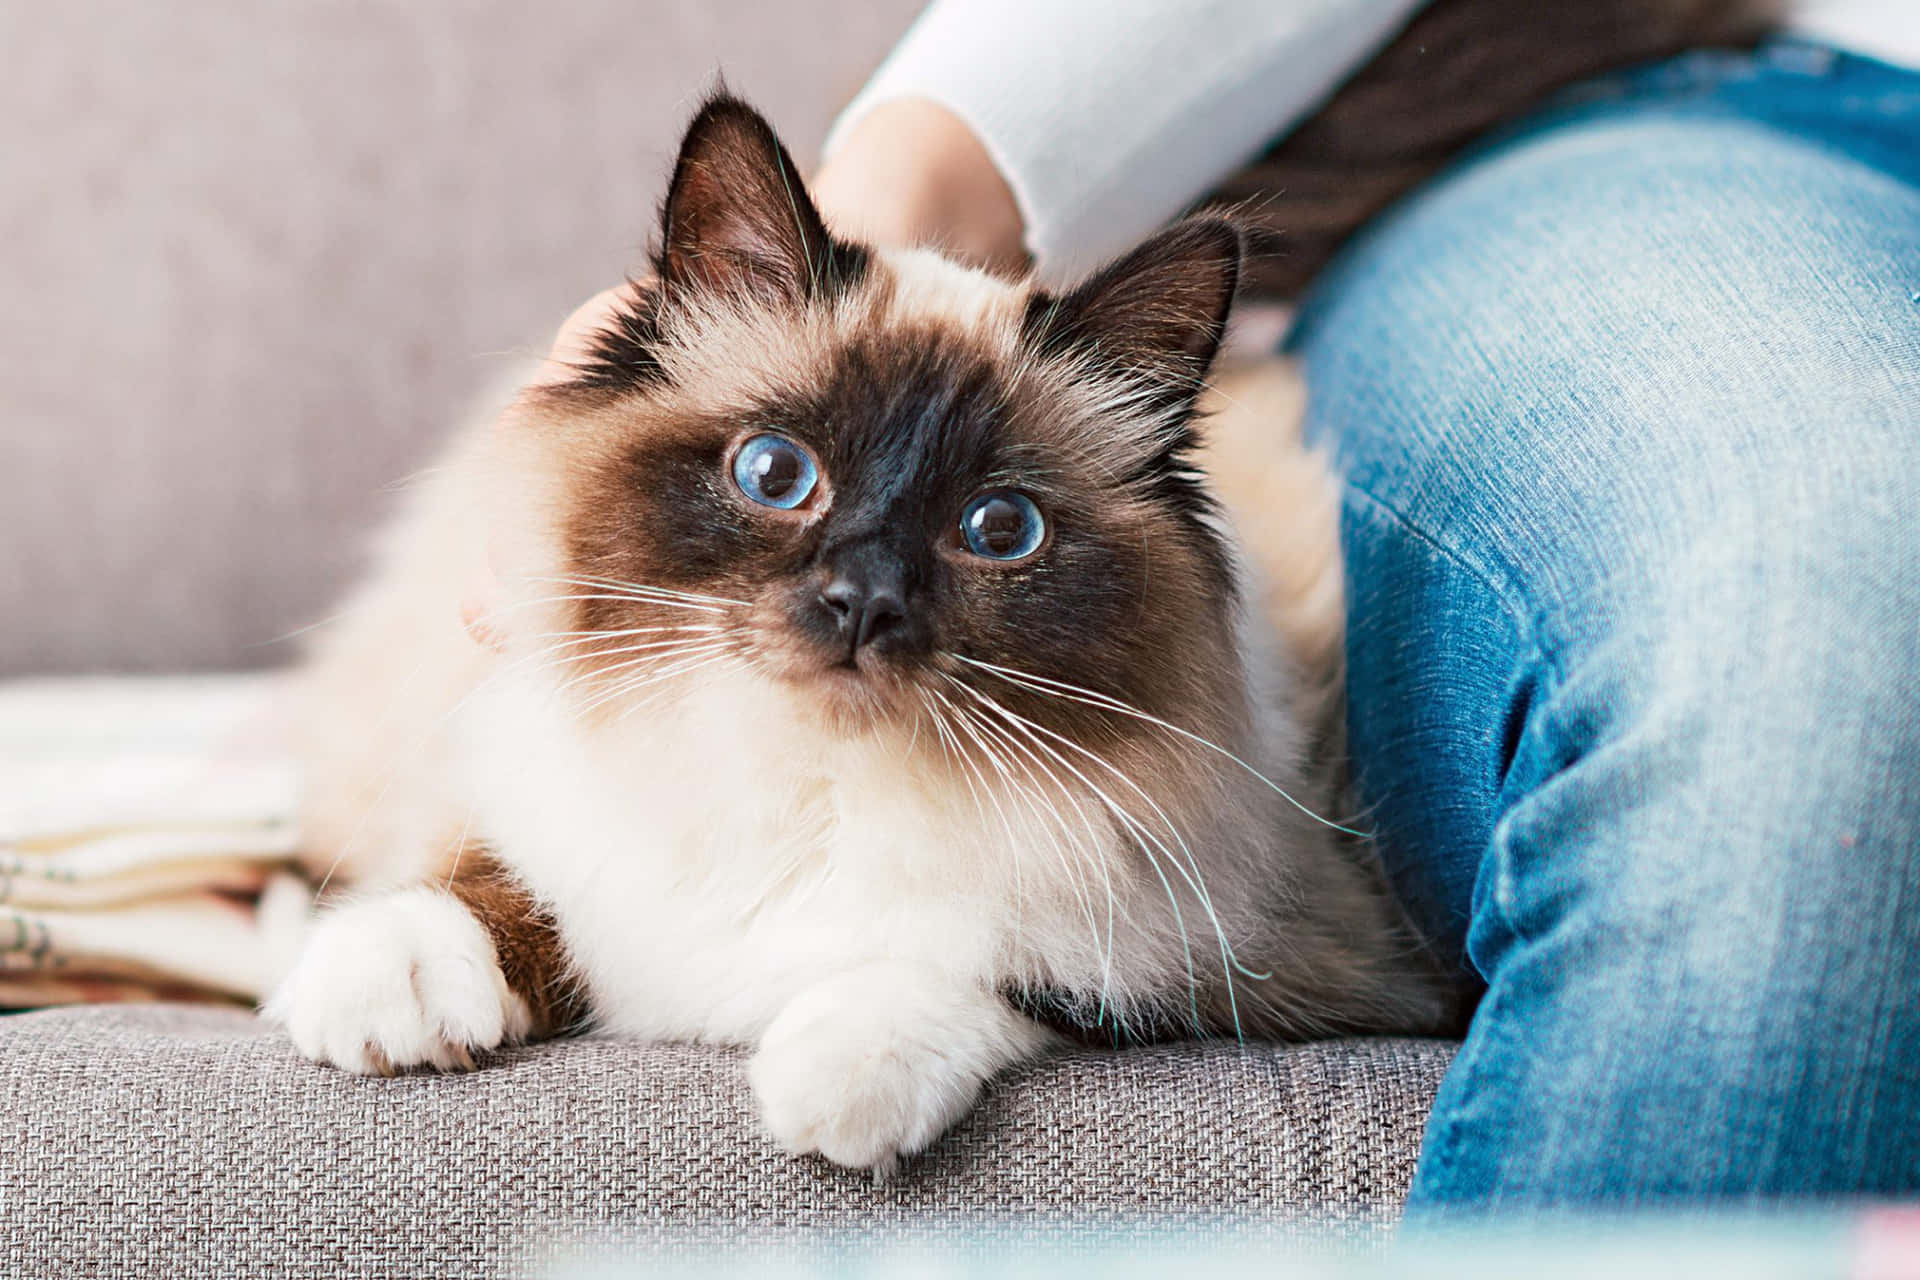 A cute Birman cat with blue eyes relaxing on a sofa Wallpaper